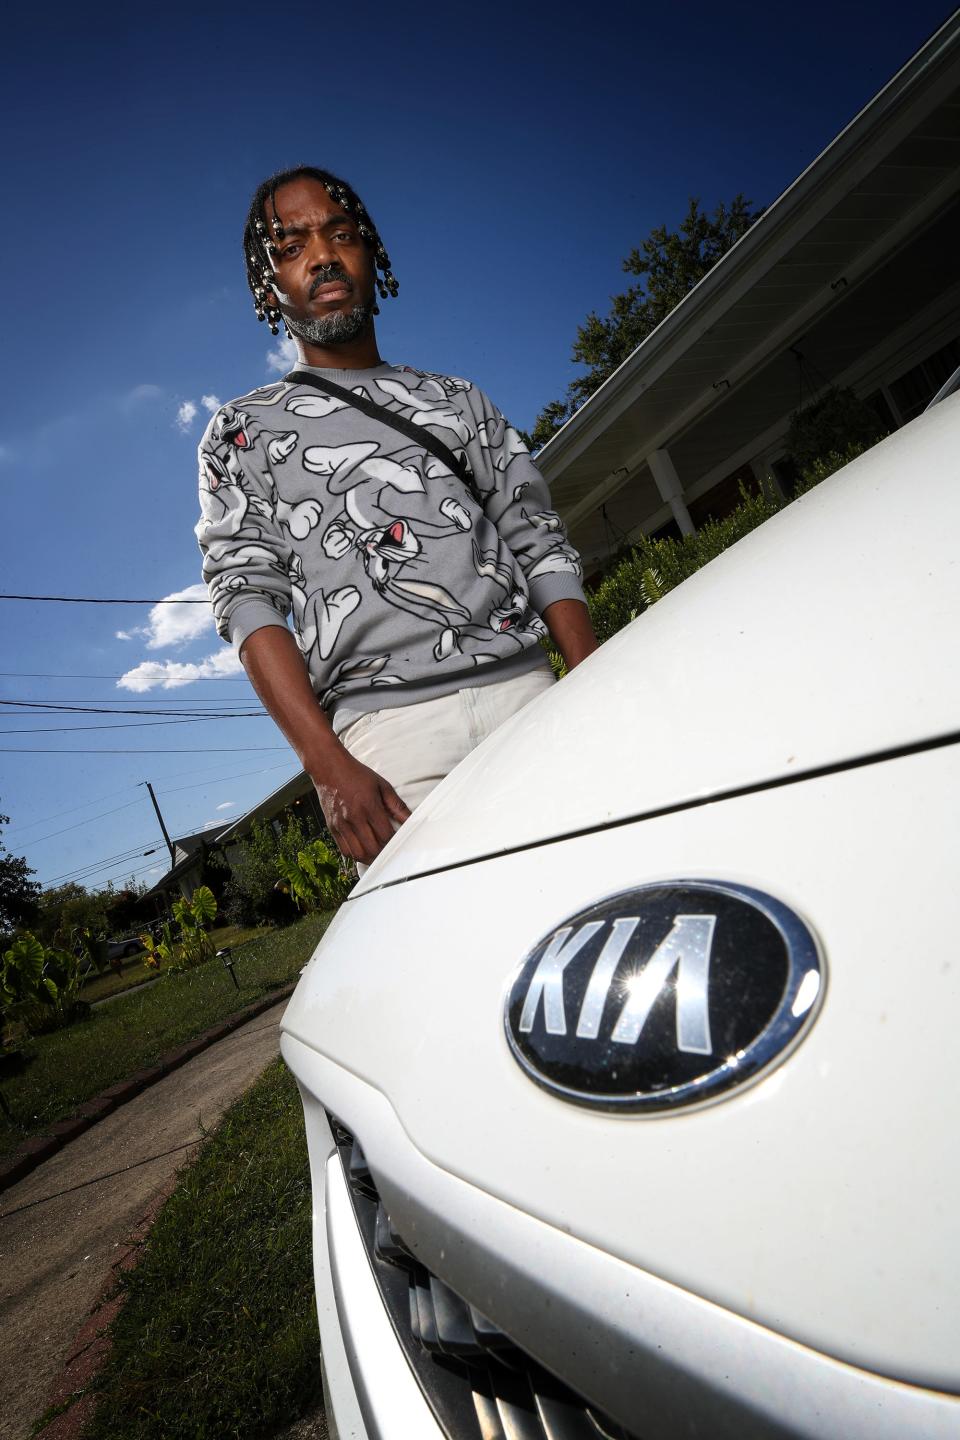 Yancy Davis had his 2020 Kia Forte stolen late September in Louisville. It was later recovered by police about a week later with damage to the interior where the thieves were able to start it without a key. October 10, 2023